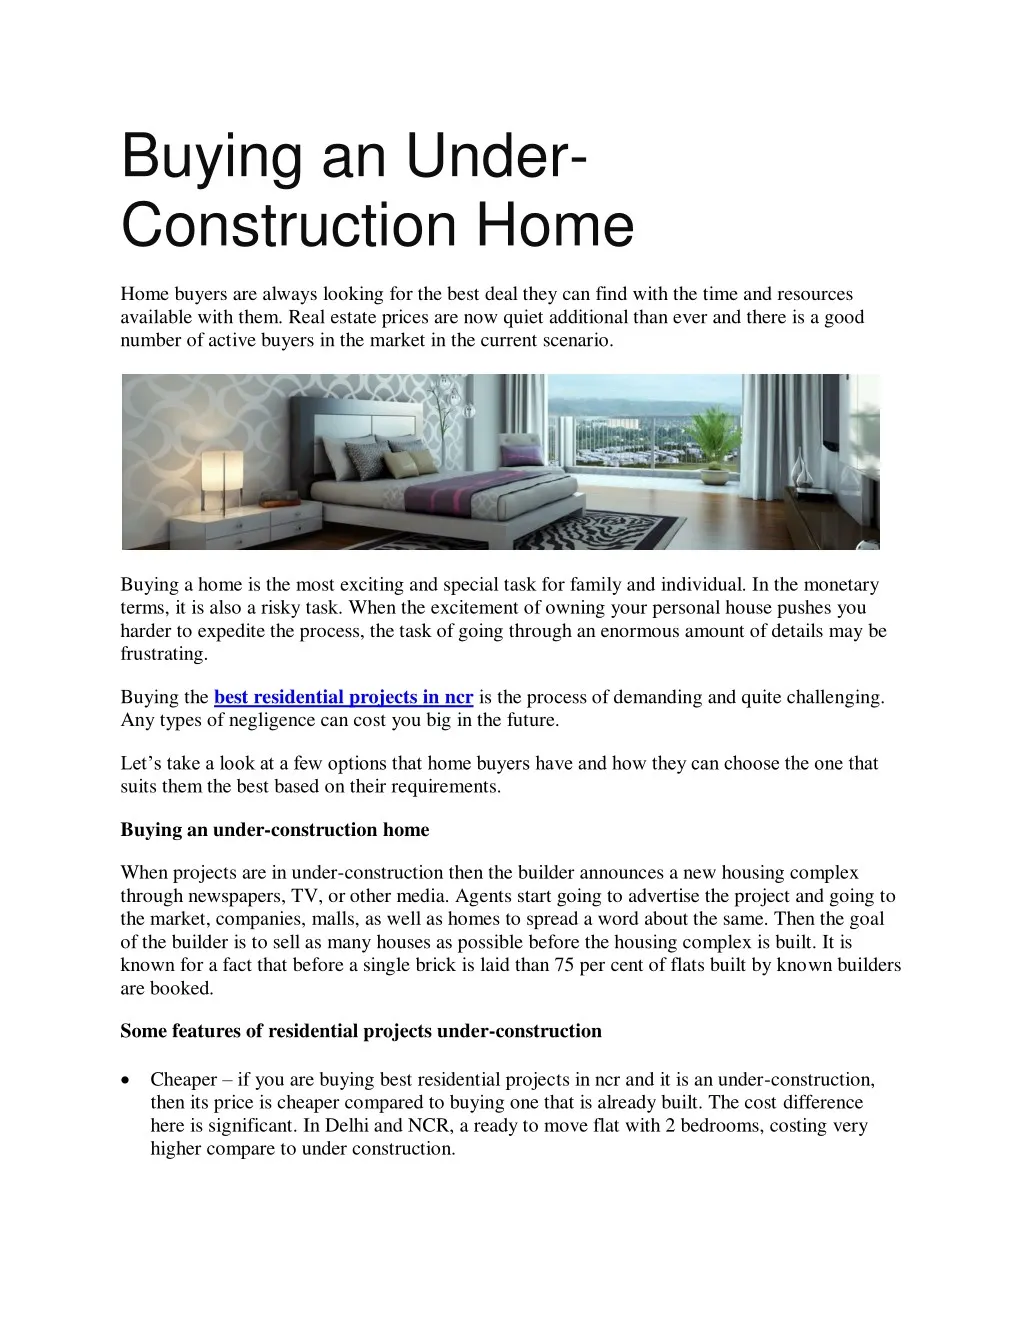 buying an under construction home home buyers